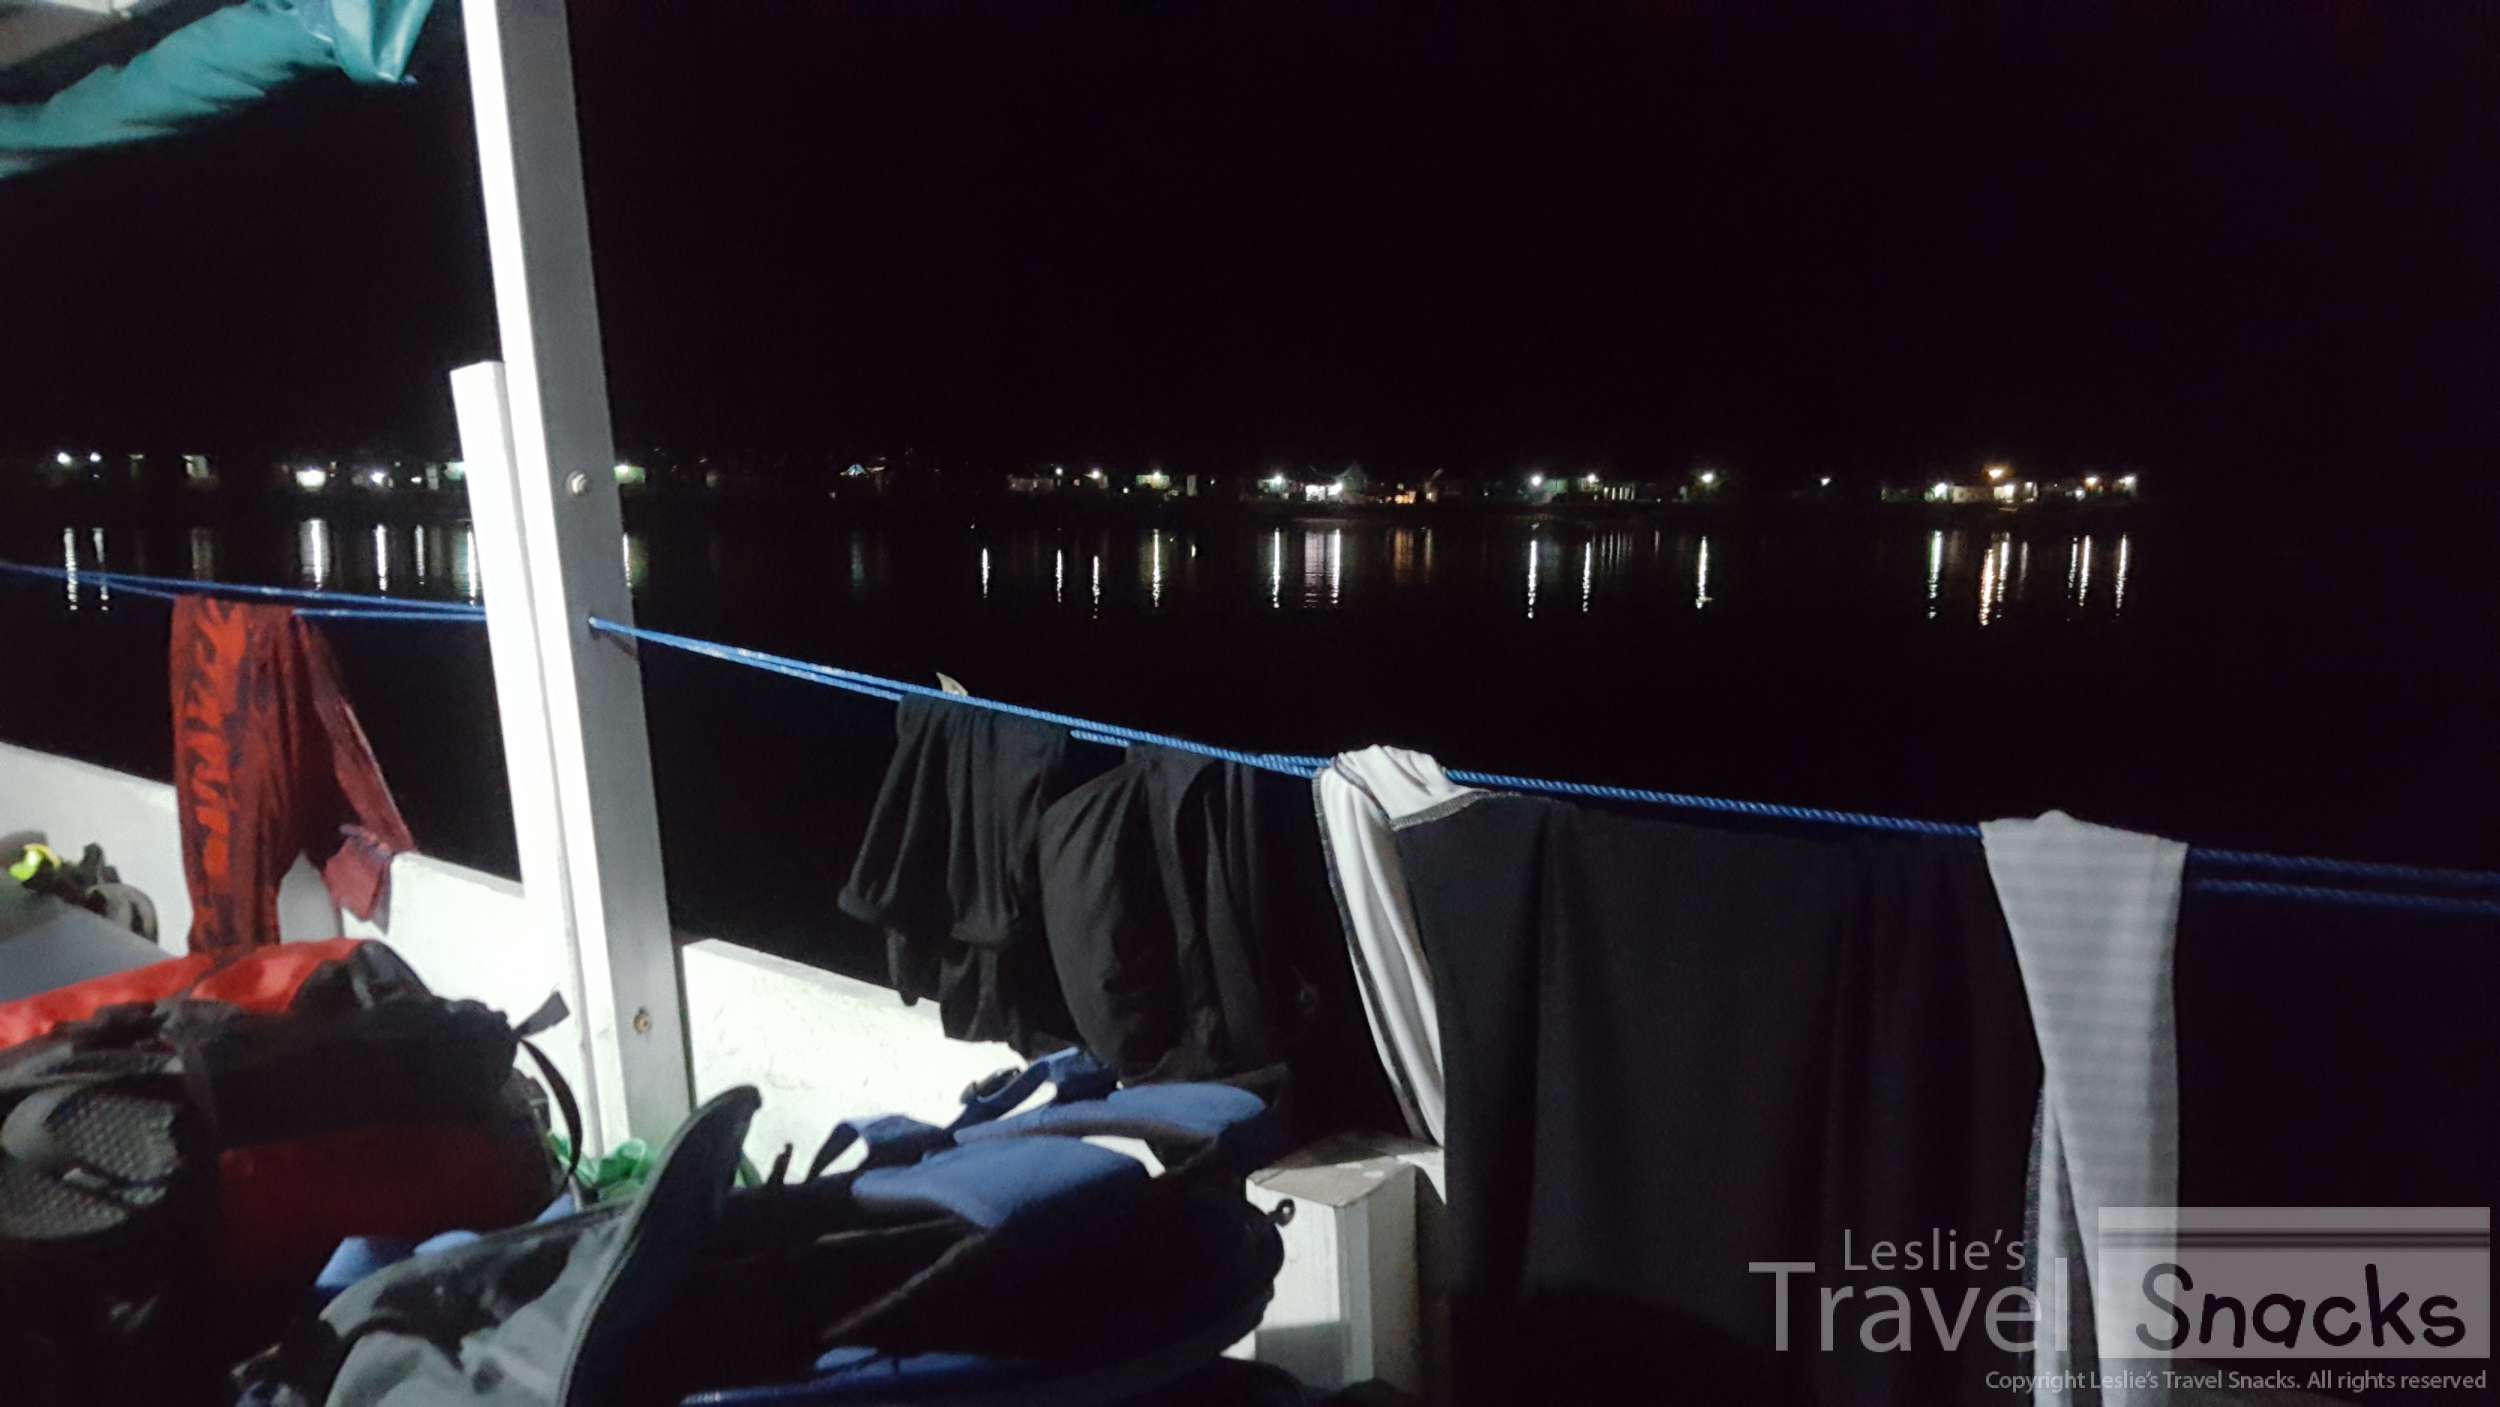 Wet clothing hanging all over the boat. 